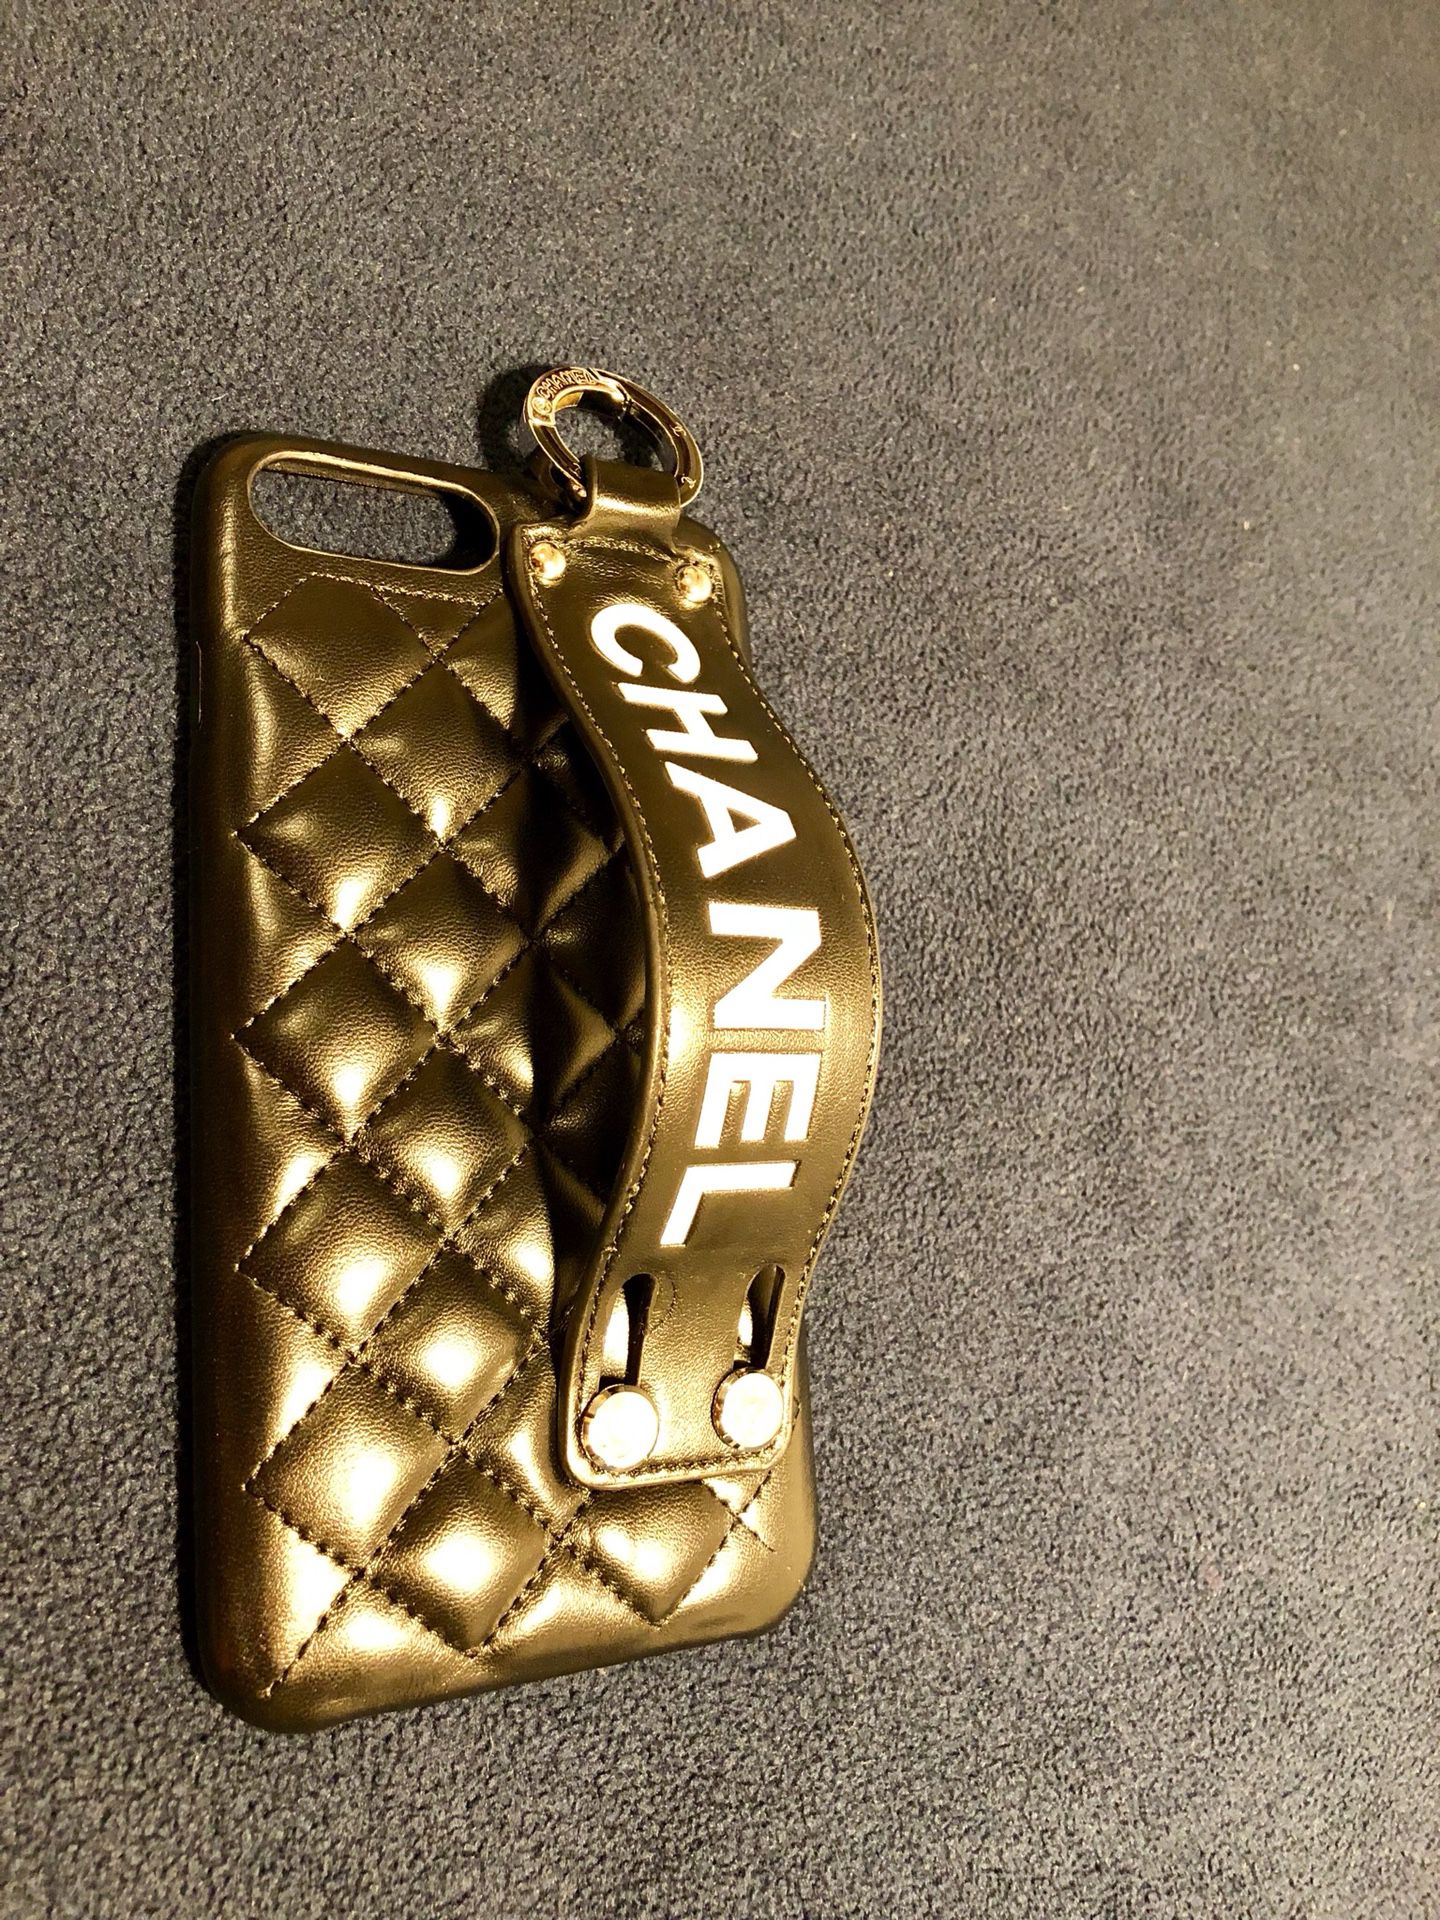 Chanel iPhone phone case iPhone 7/8 Plus for Sale in Wildomar, CA